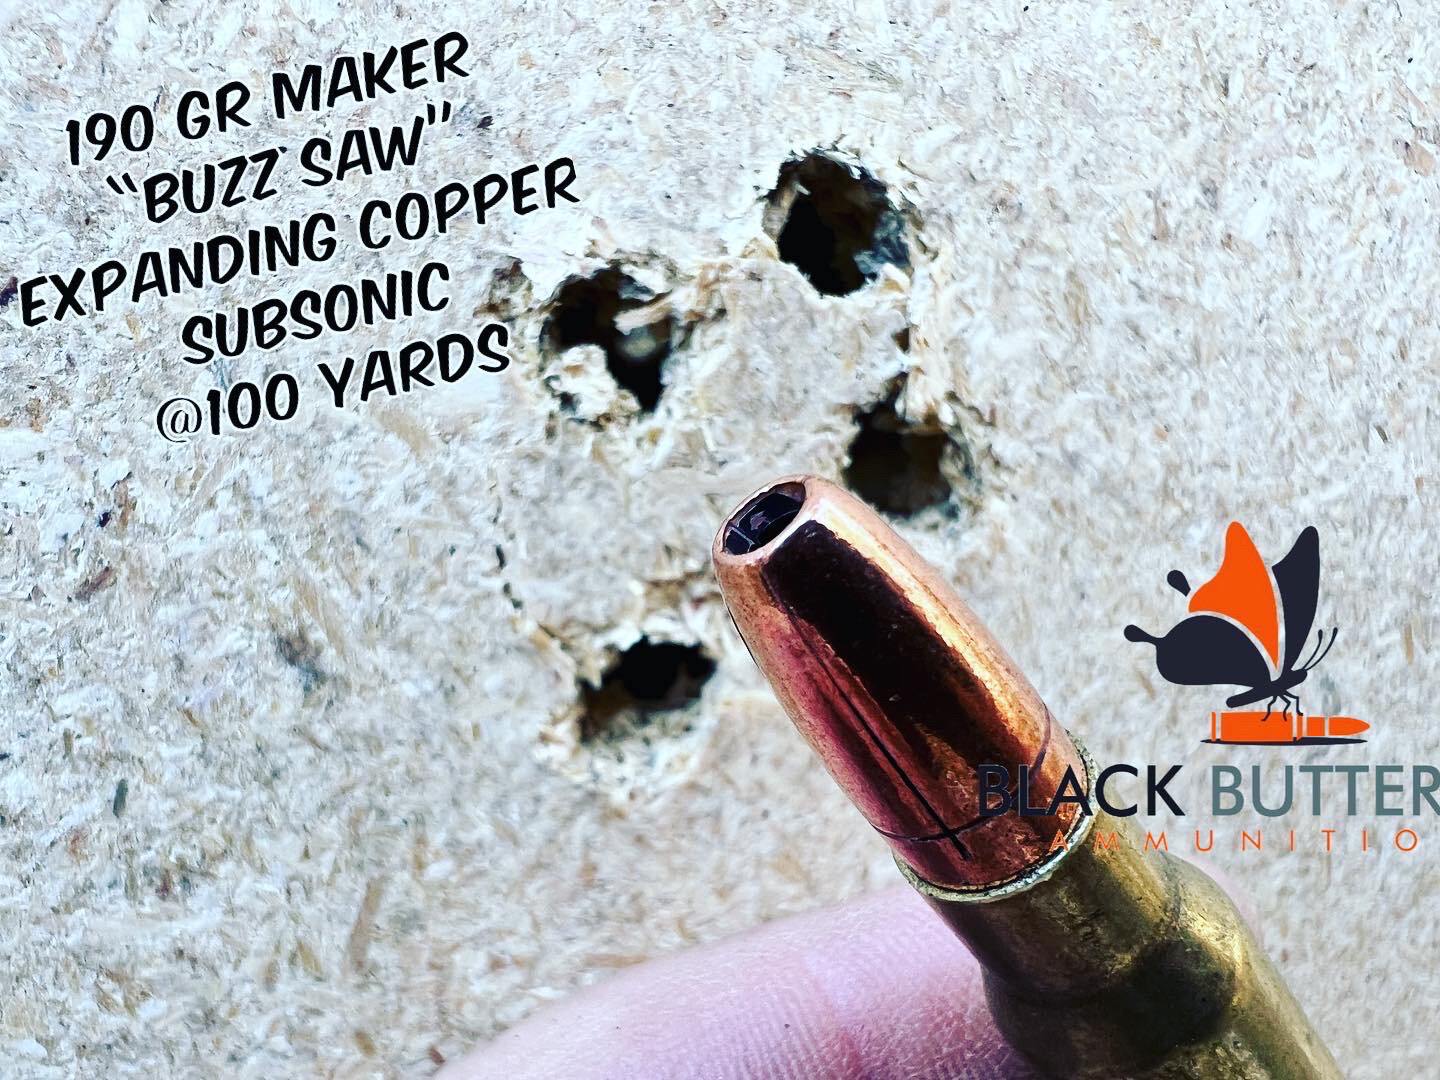 Black Butterfly Ammunition .308/7.62x51mm, 190 gr., 20 Rounds, SUBSONIC MAKER EXPANDING COPPER &quot;BUZZSAW&quot; (1070 AMV) 1:10 OR FASTER TWIST